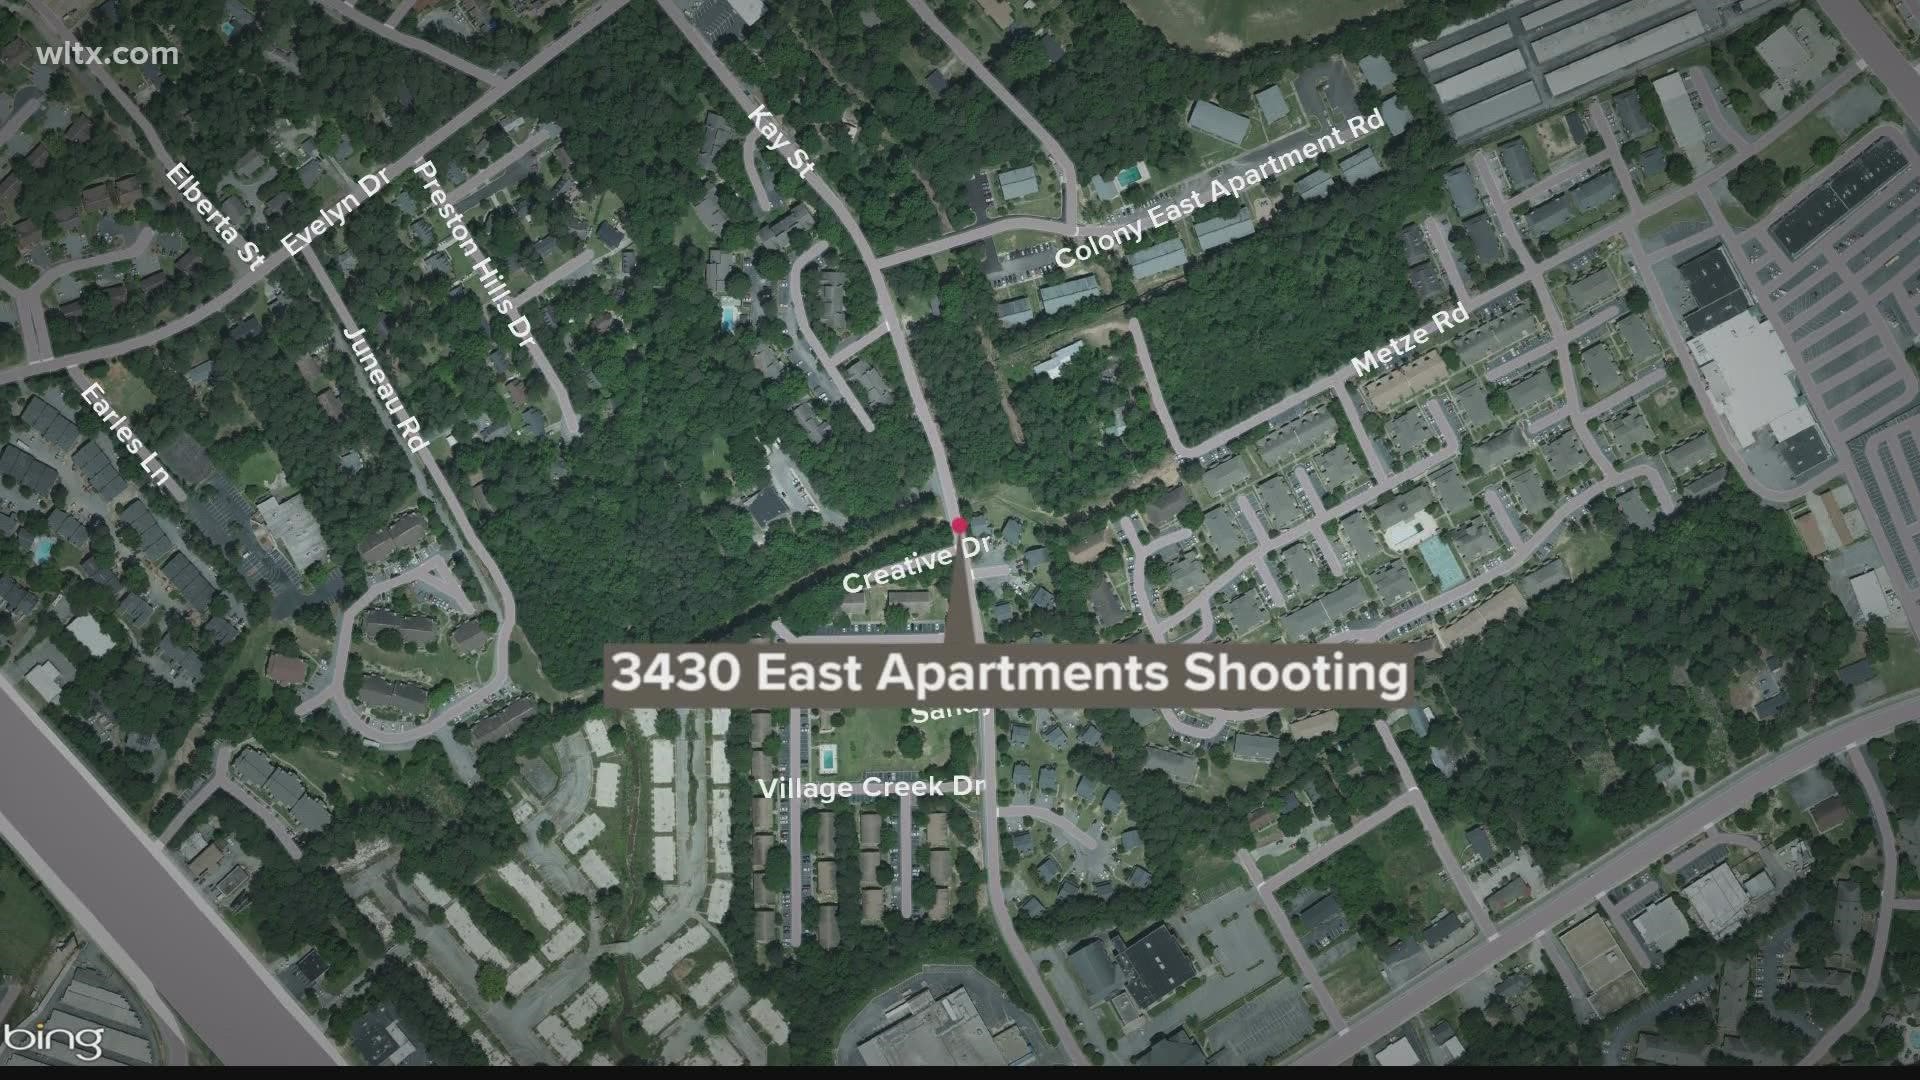 Deputies are investigating a Friday night shooting at a Columbia apartment complex that left one person dead.